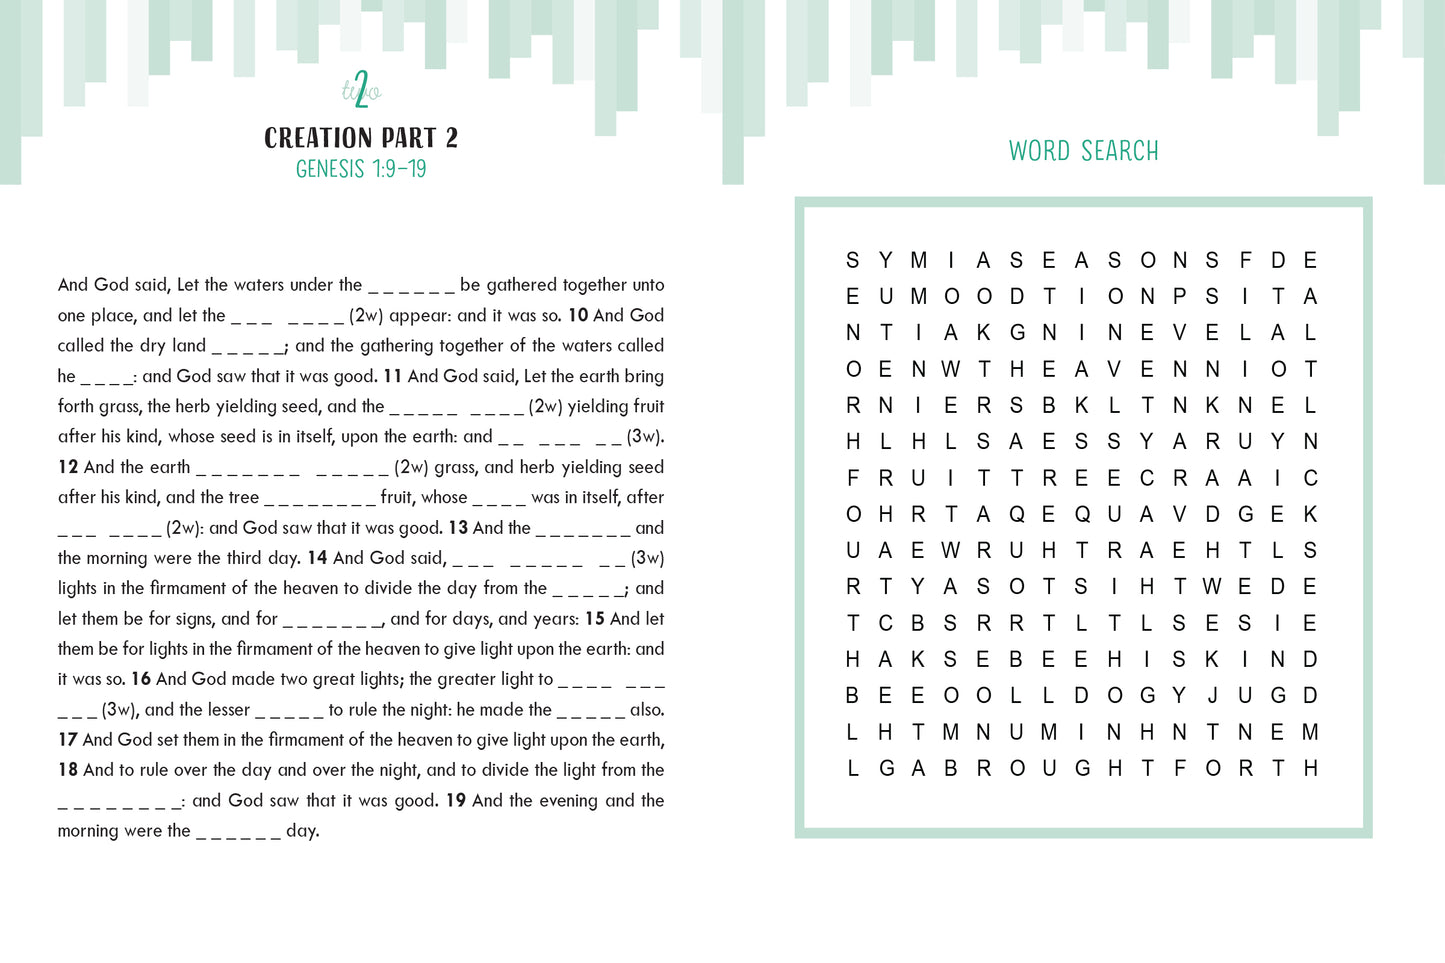 Bible Memory Word Searches - The Christian Gift Company